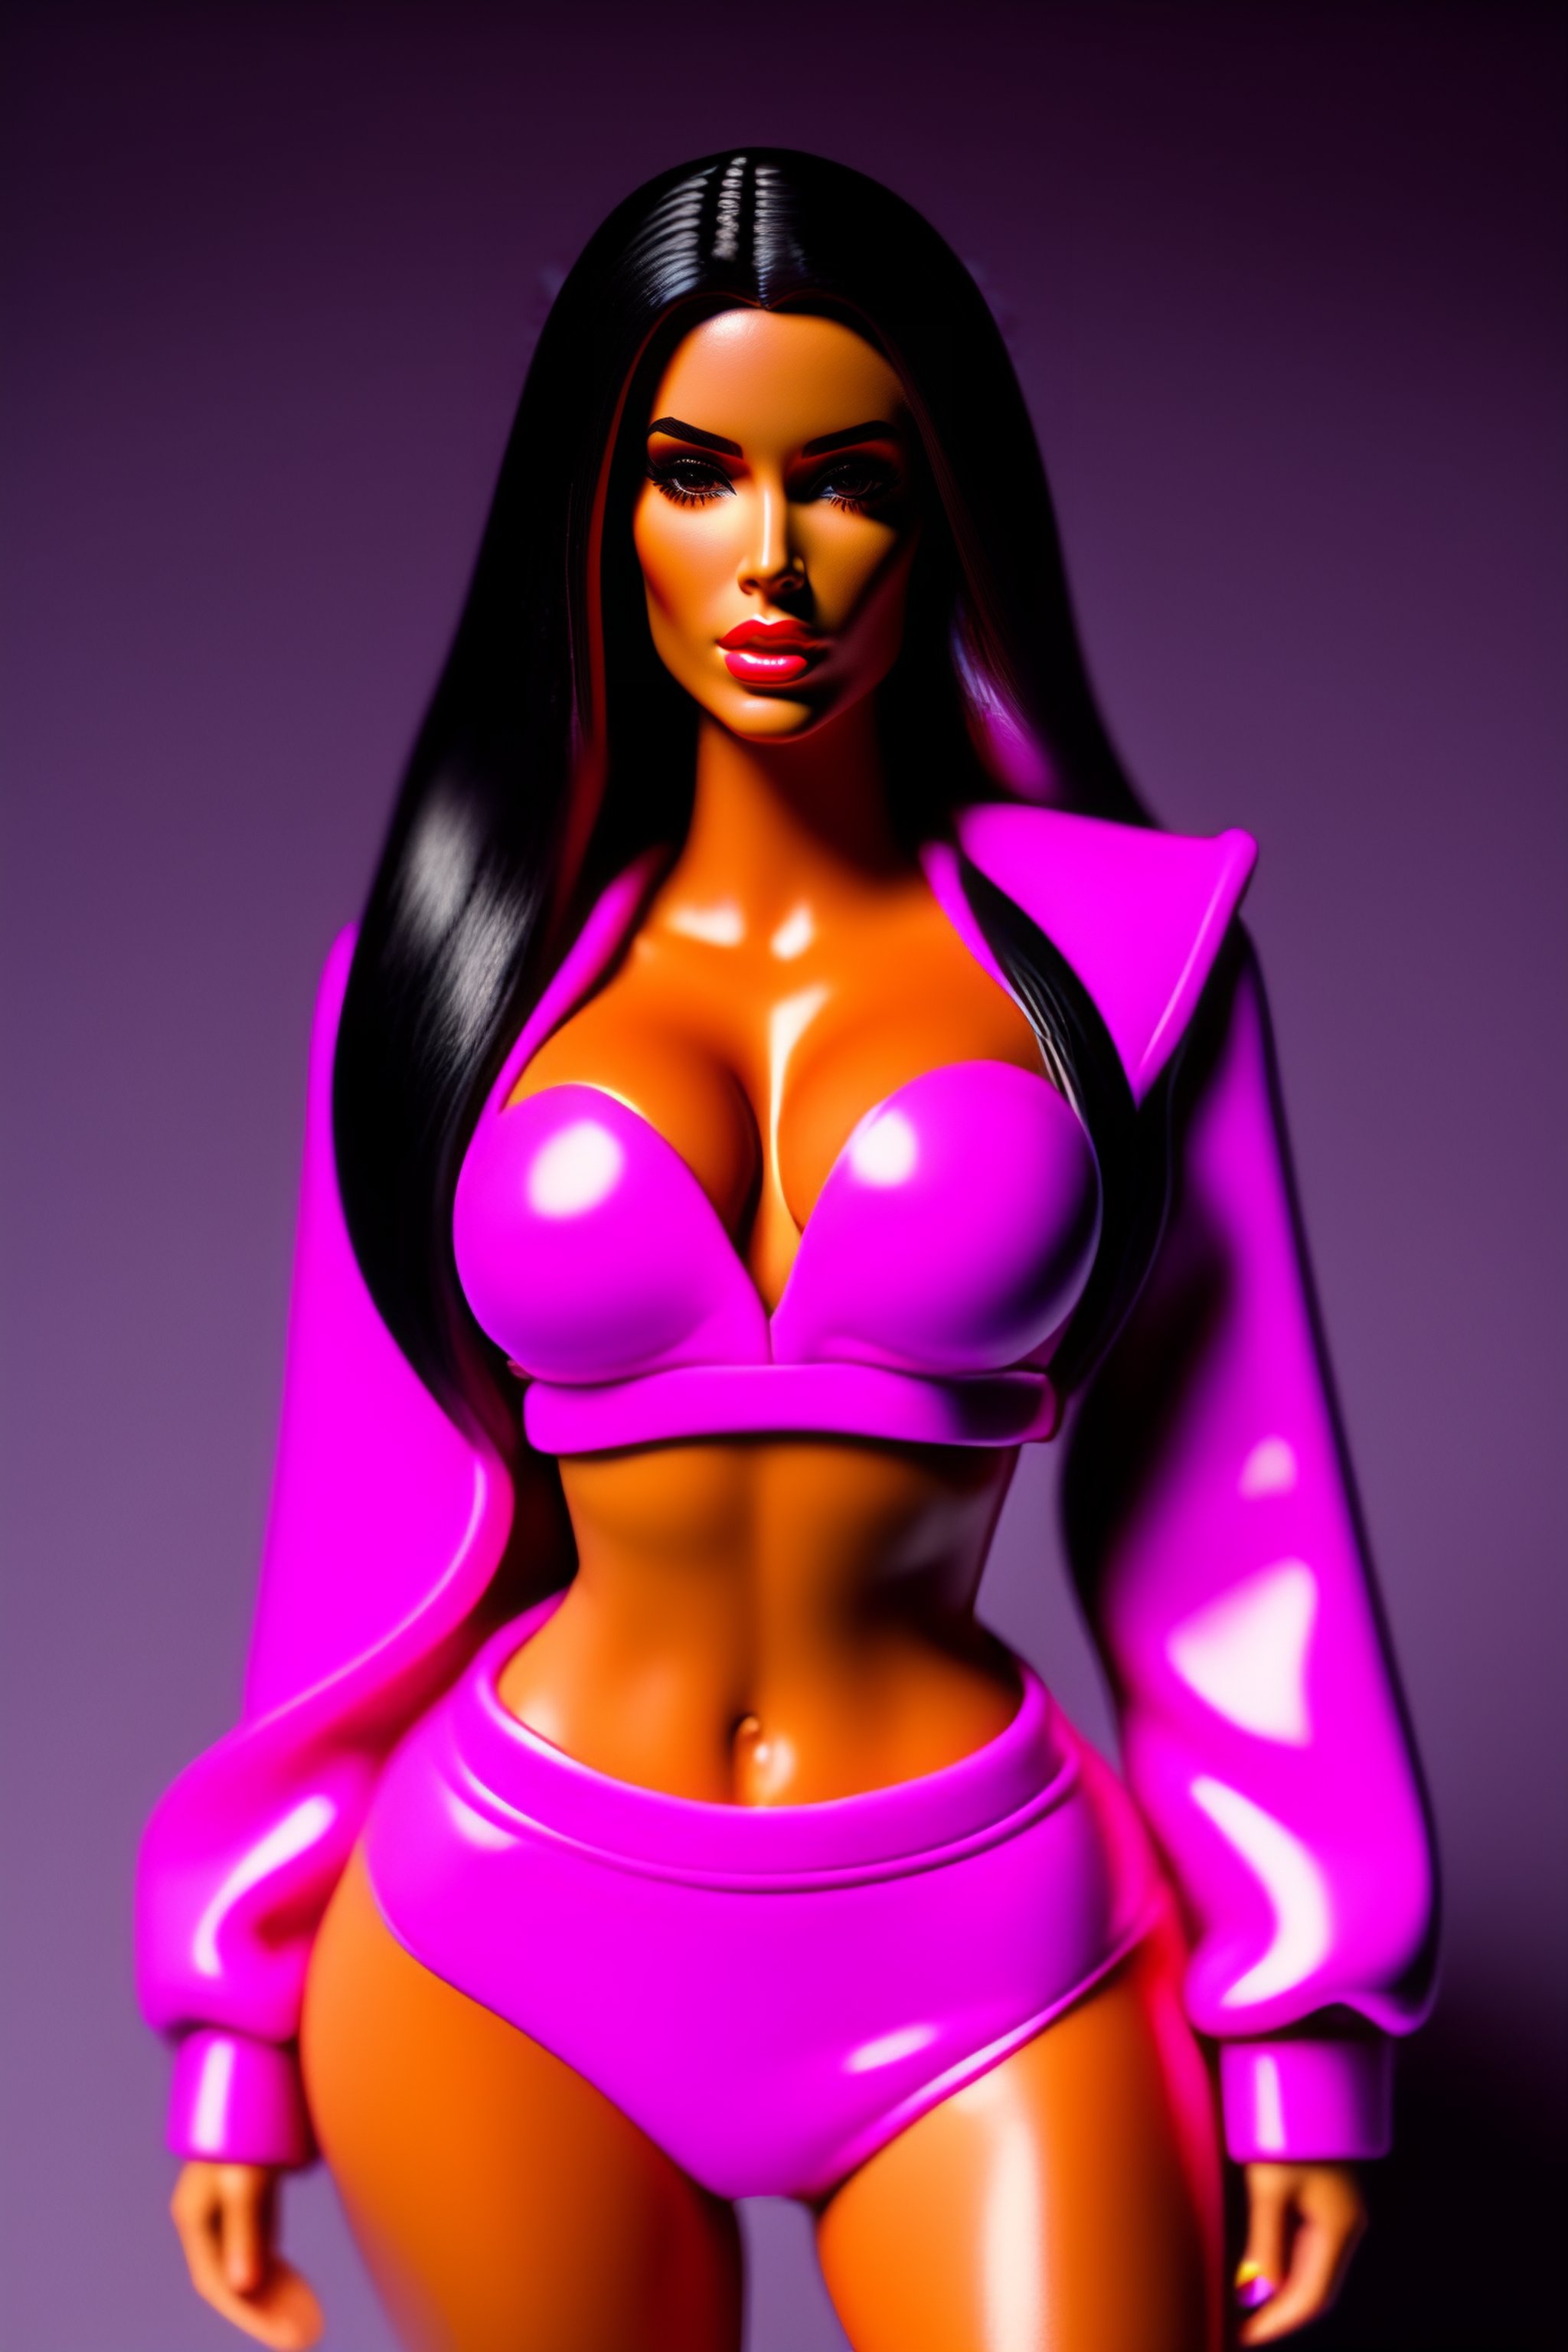 Lexica - Madison beer plastic tight barbie doll body, pretty detailed face,  shorts and pink top, tight abs, 1988 product photography, plain backgroun